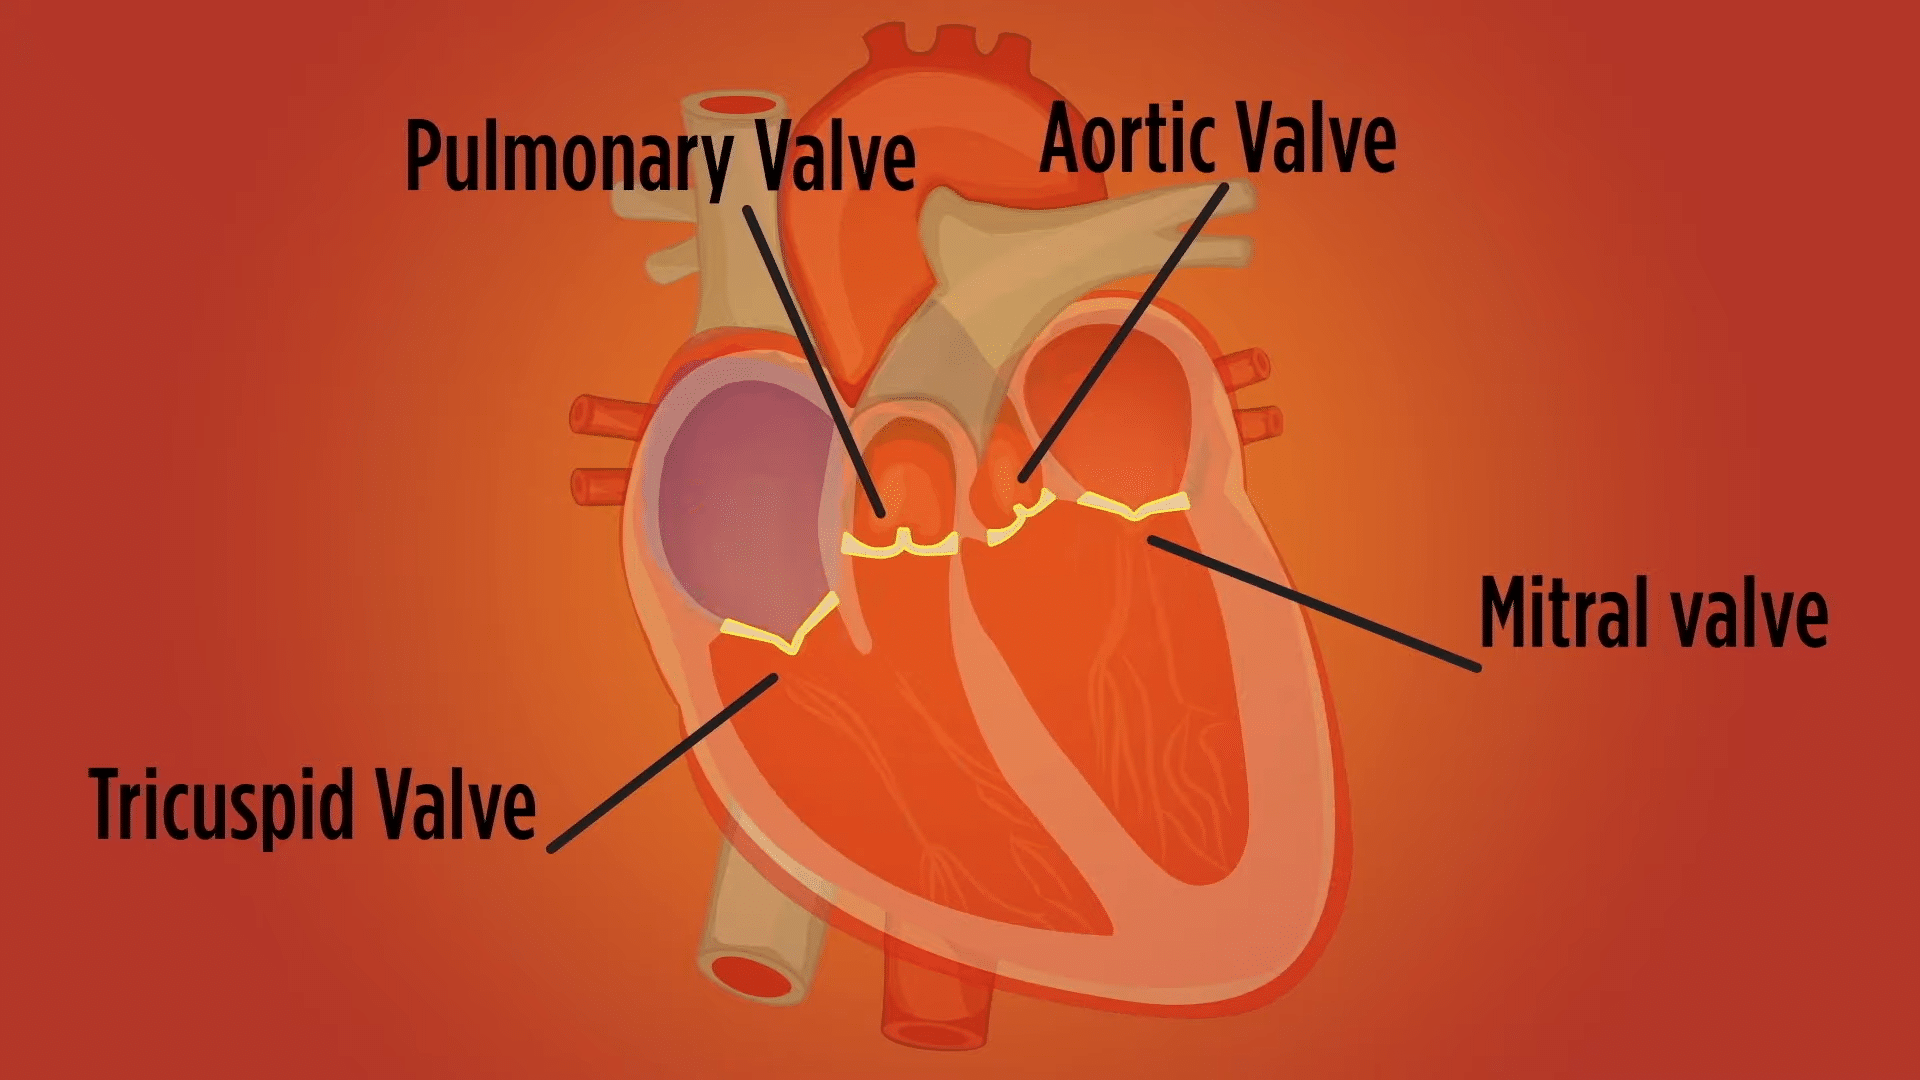 Illustration of the heart labeling pulmonary, aortic, mitral, and tricuspid valves.